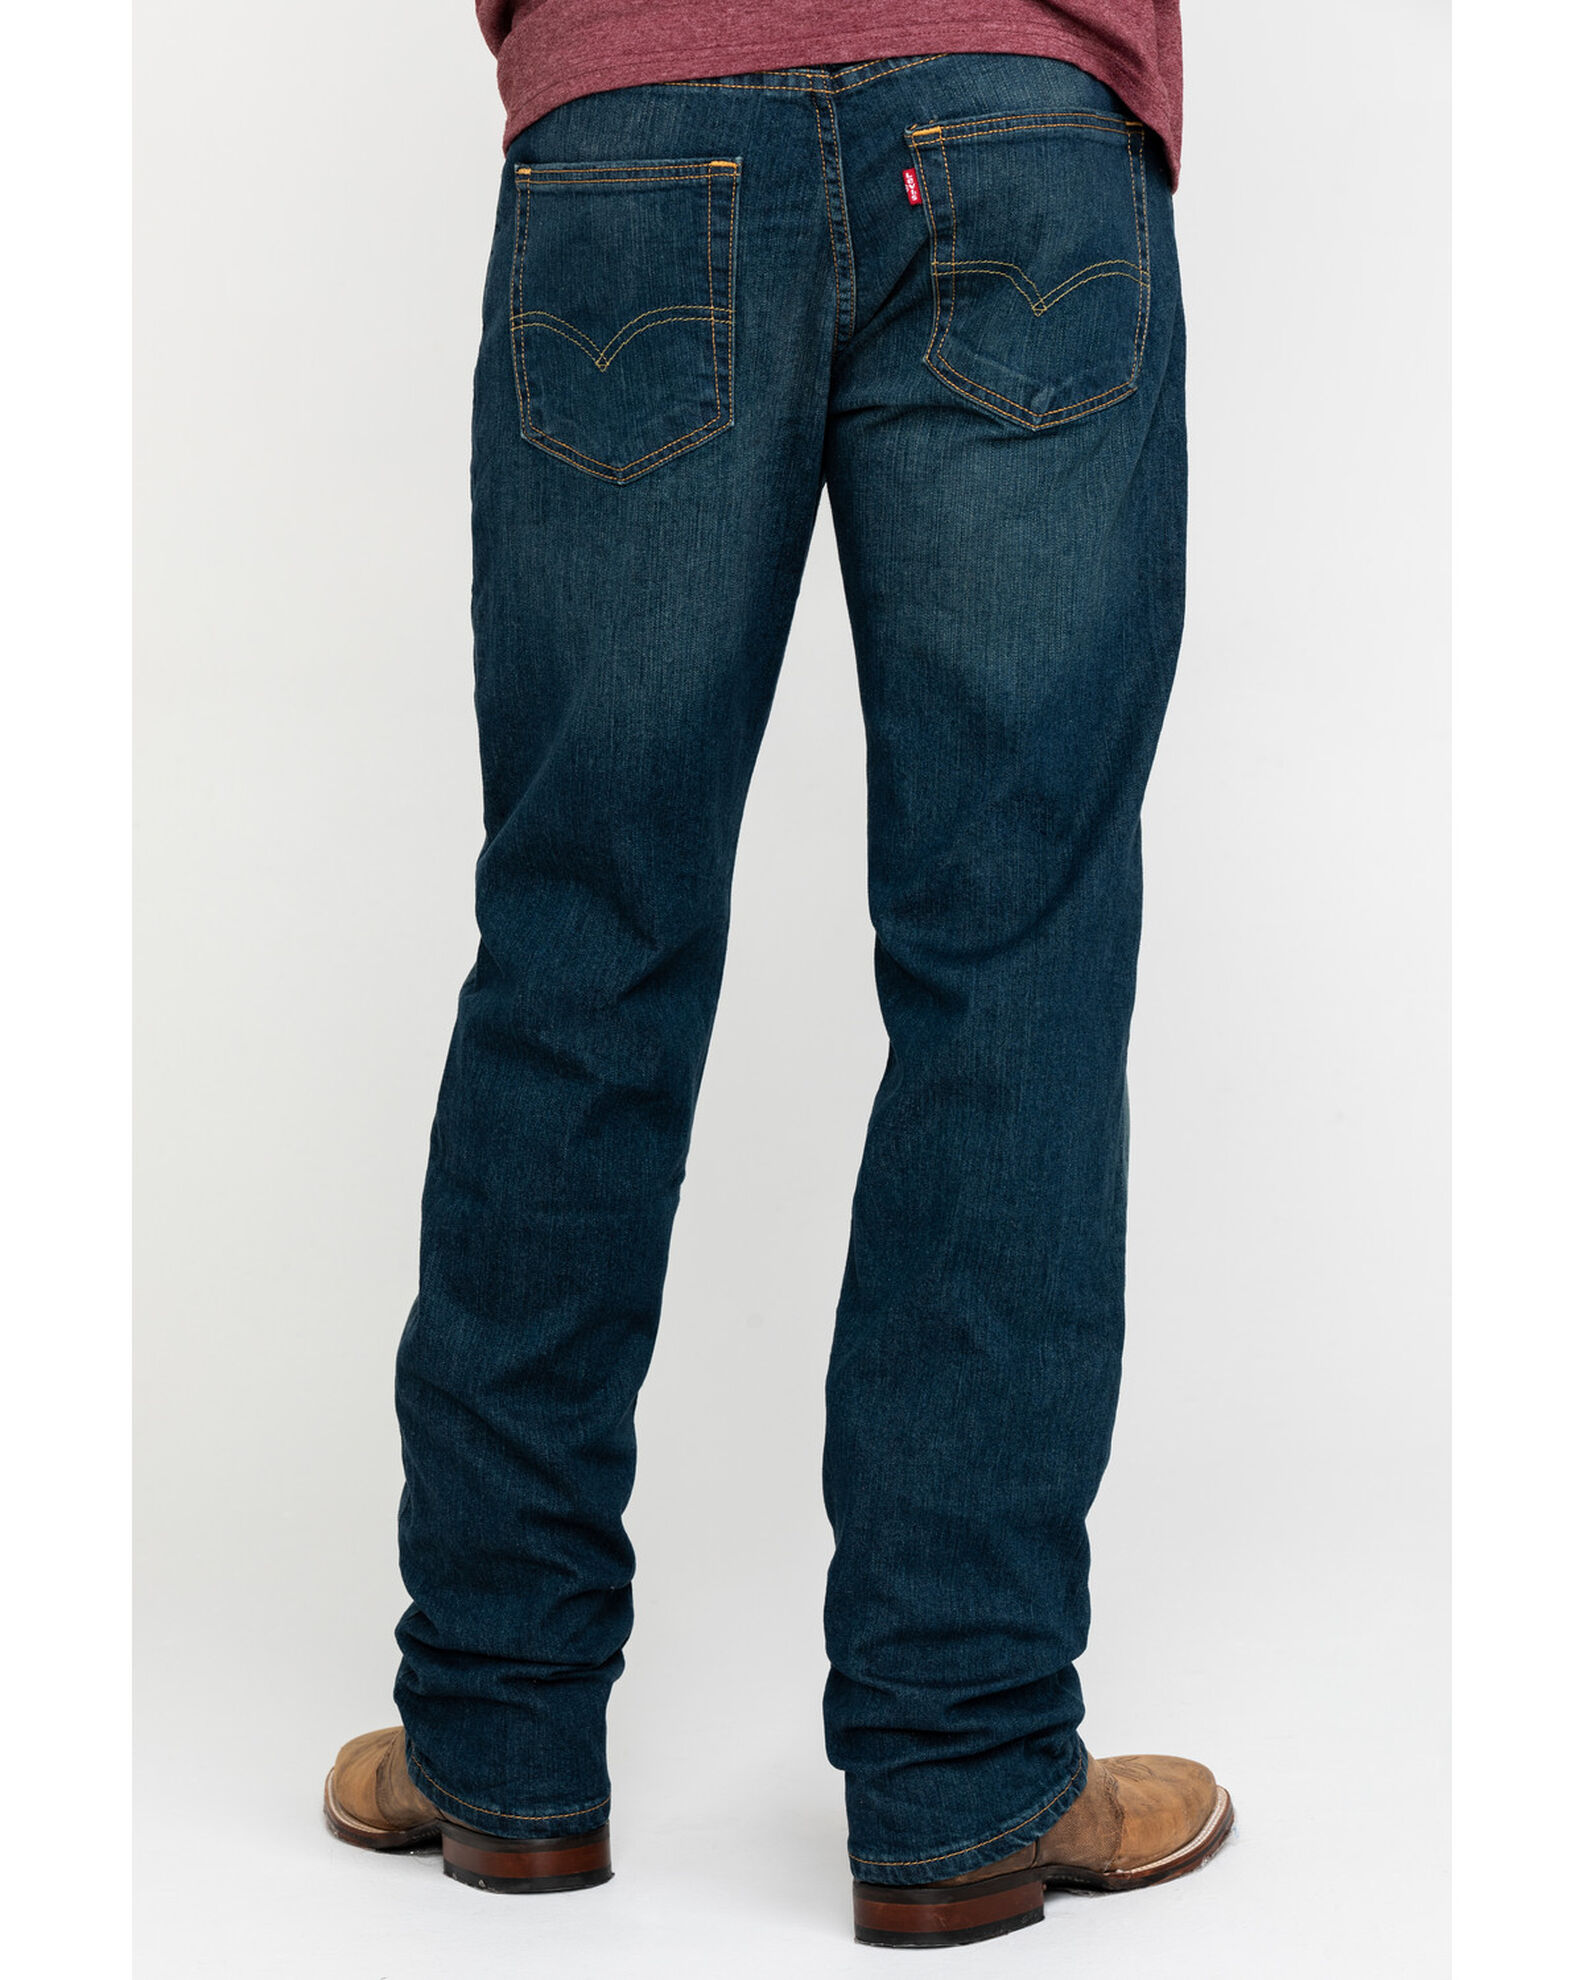 Levi's Men's Cash Relaxed Straight Leg Jeans - Country Outfitter